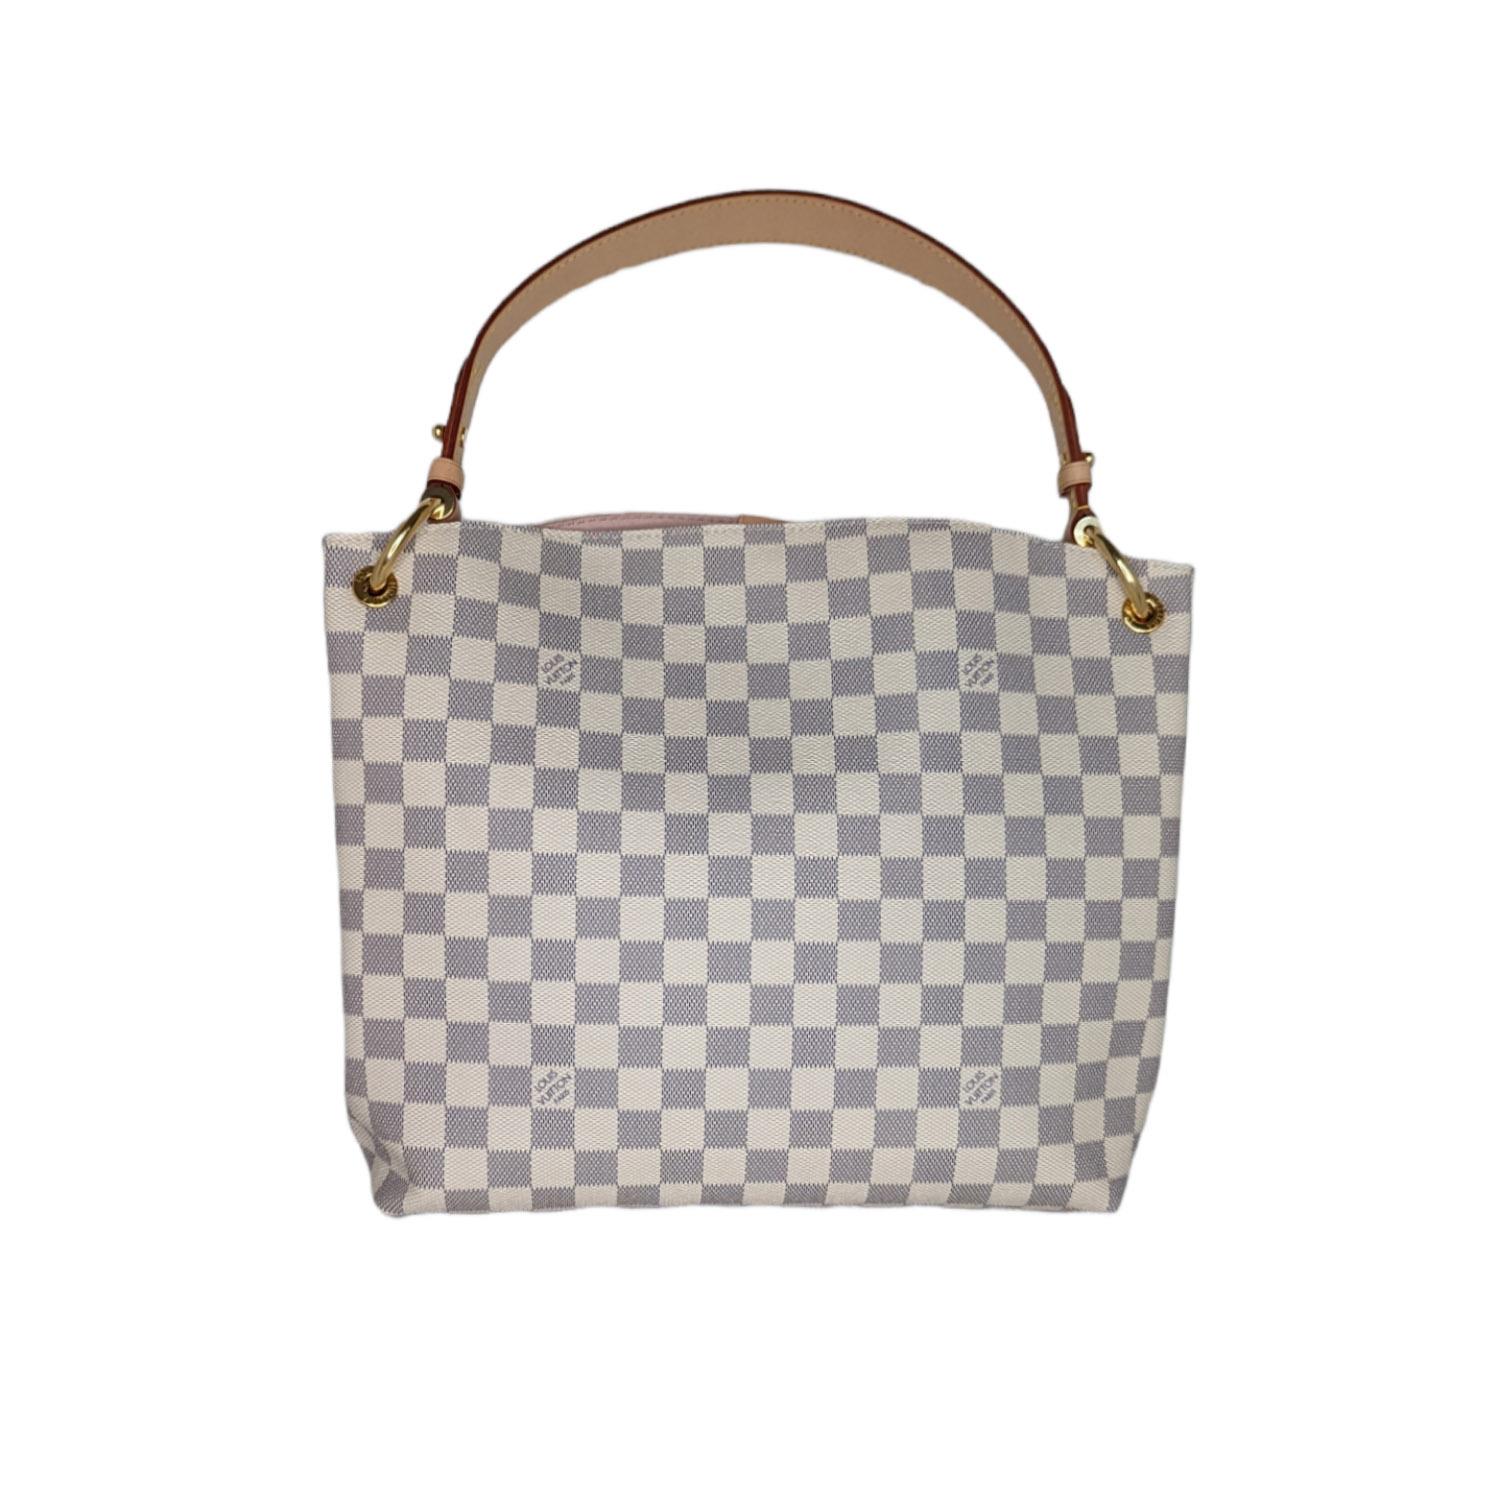 This stylish shoulder bag is finely crafted of Louis Vuitton's signature Damier coated canvas in blue and white. The bag features a flat vachetta leather shoulder strap with polished brass hardware and a magnetic closure. This opens the bag to a